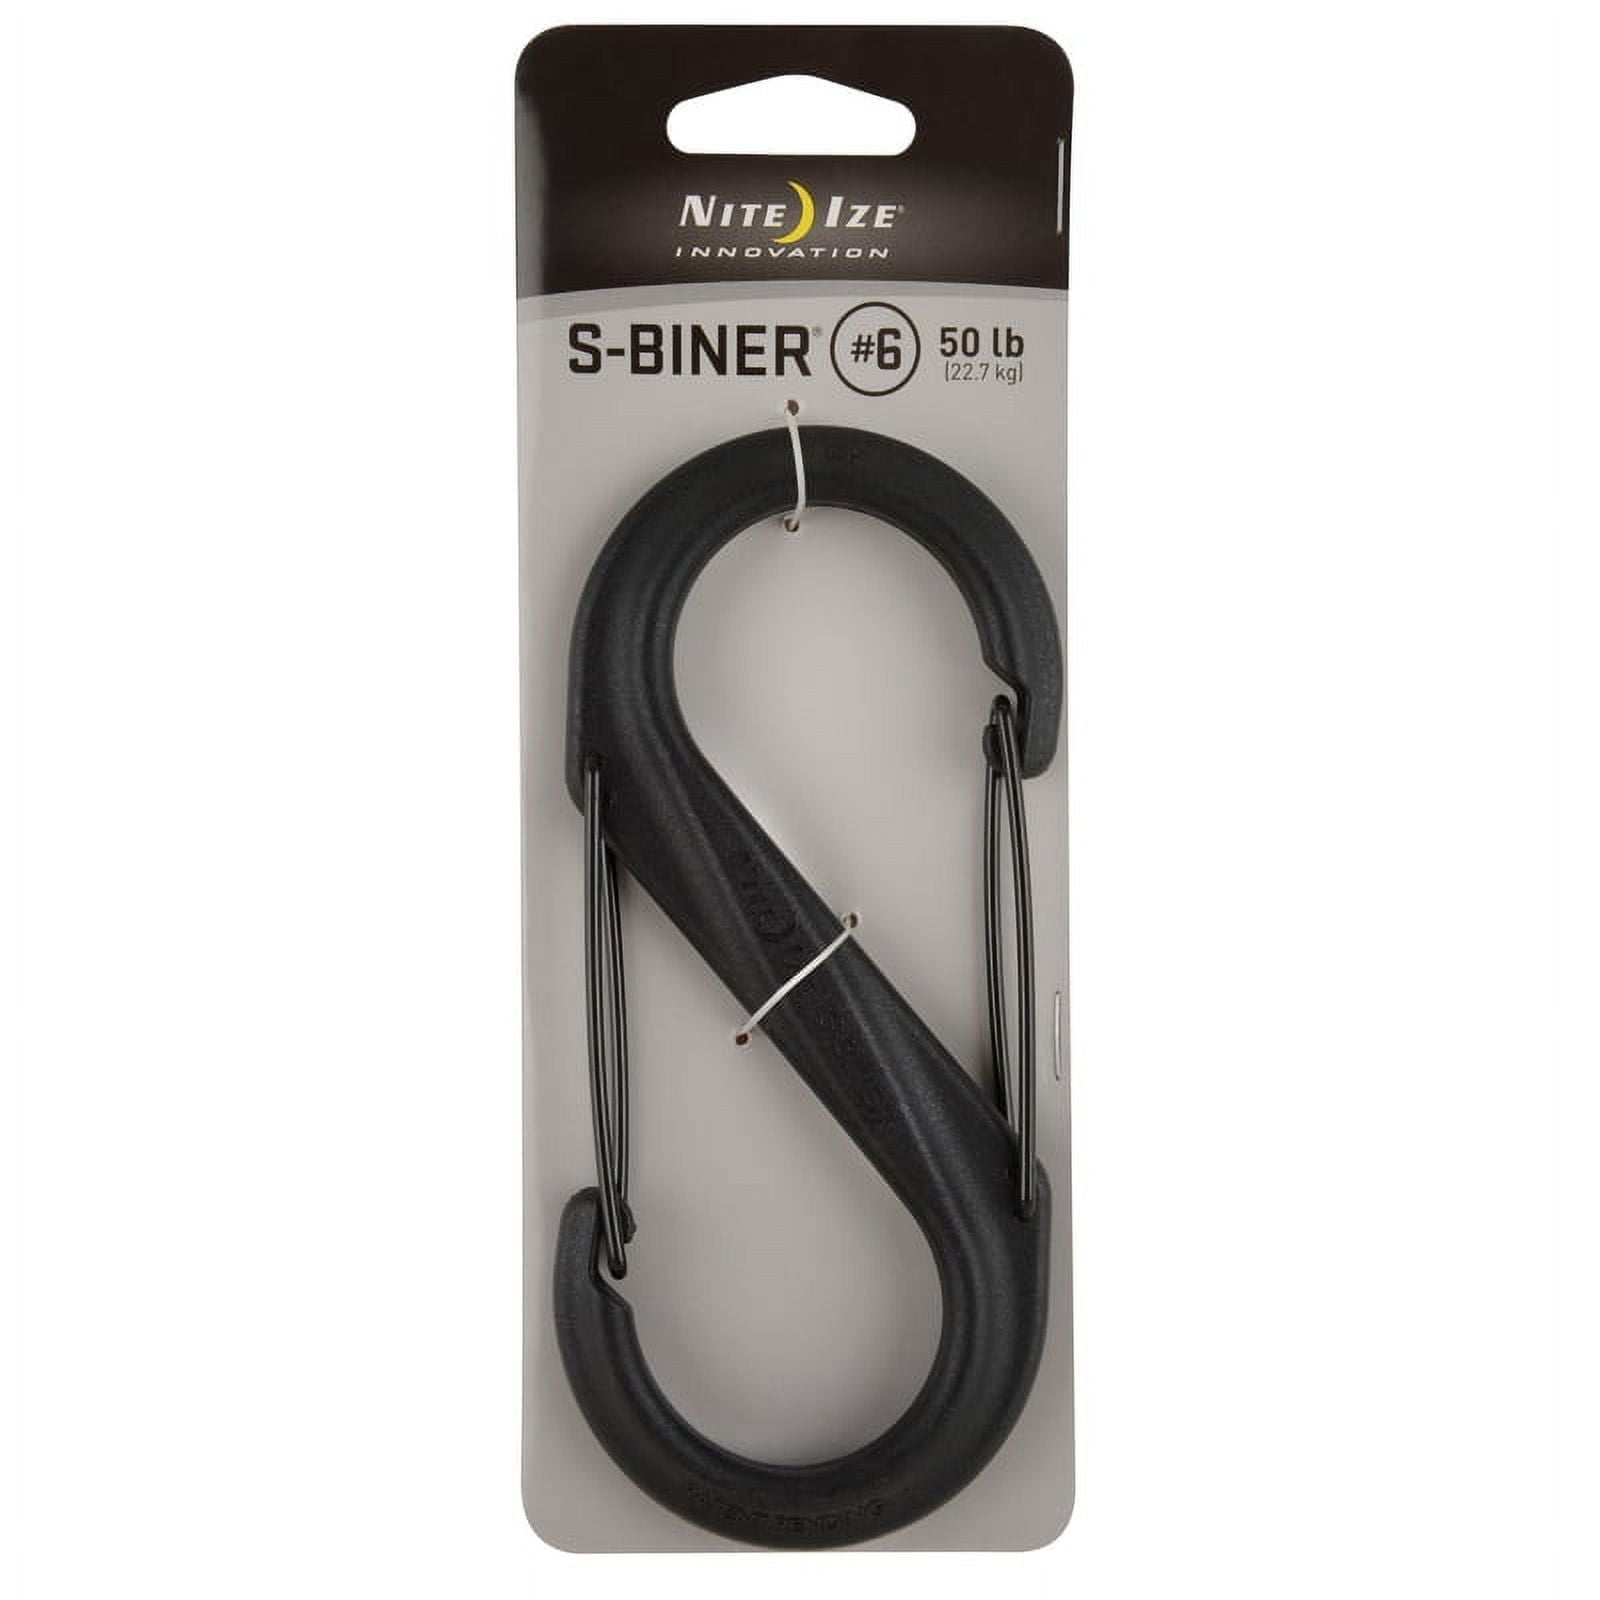 Nite Ize S-Biner Dual Carabiners, Stainless-Steel, unisex-adult, Black,  Assorted 3-Pack, Sizes 2, 3, 4